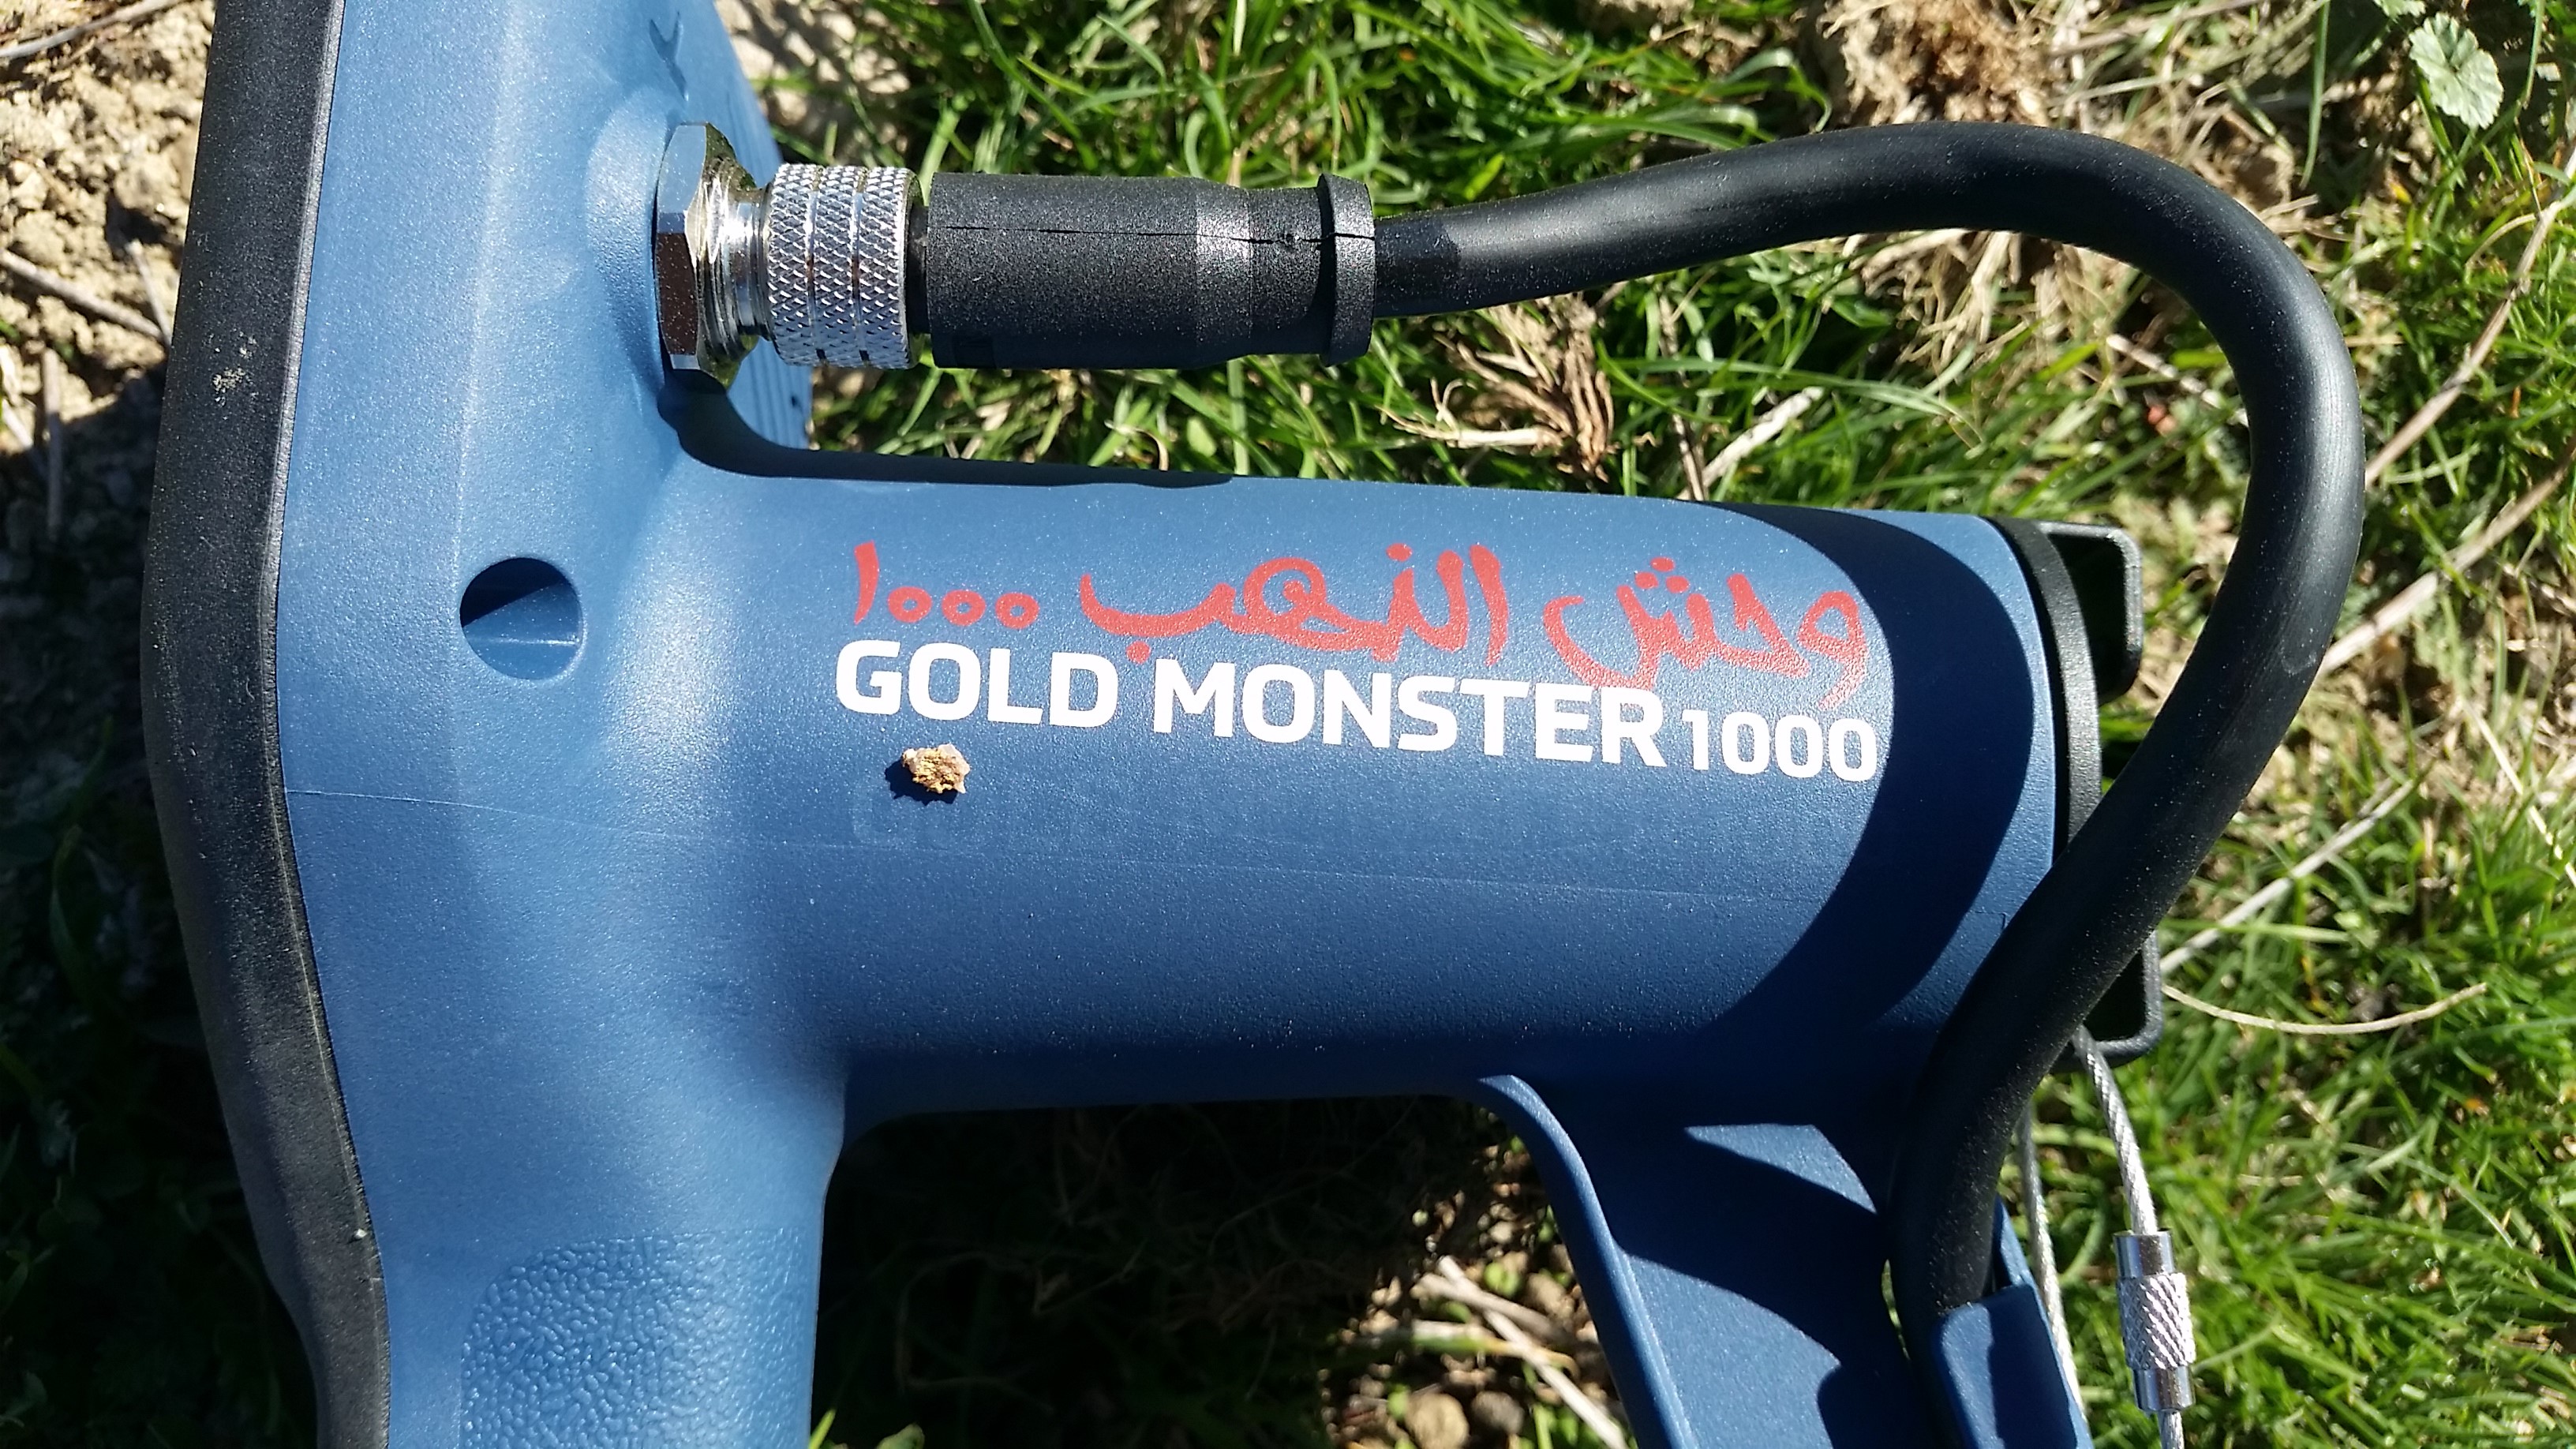 My first weekend with the GOLD MONSTER 1000 